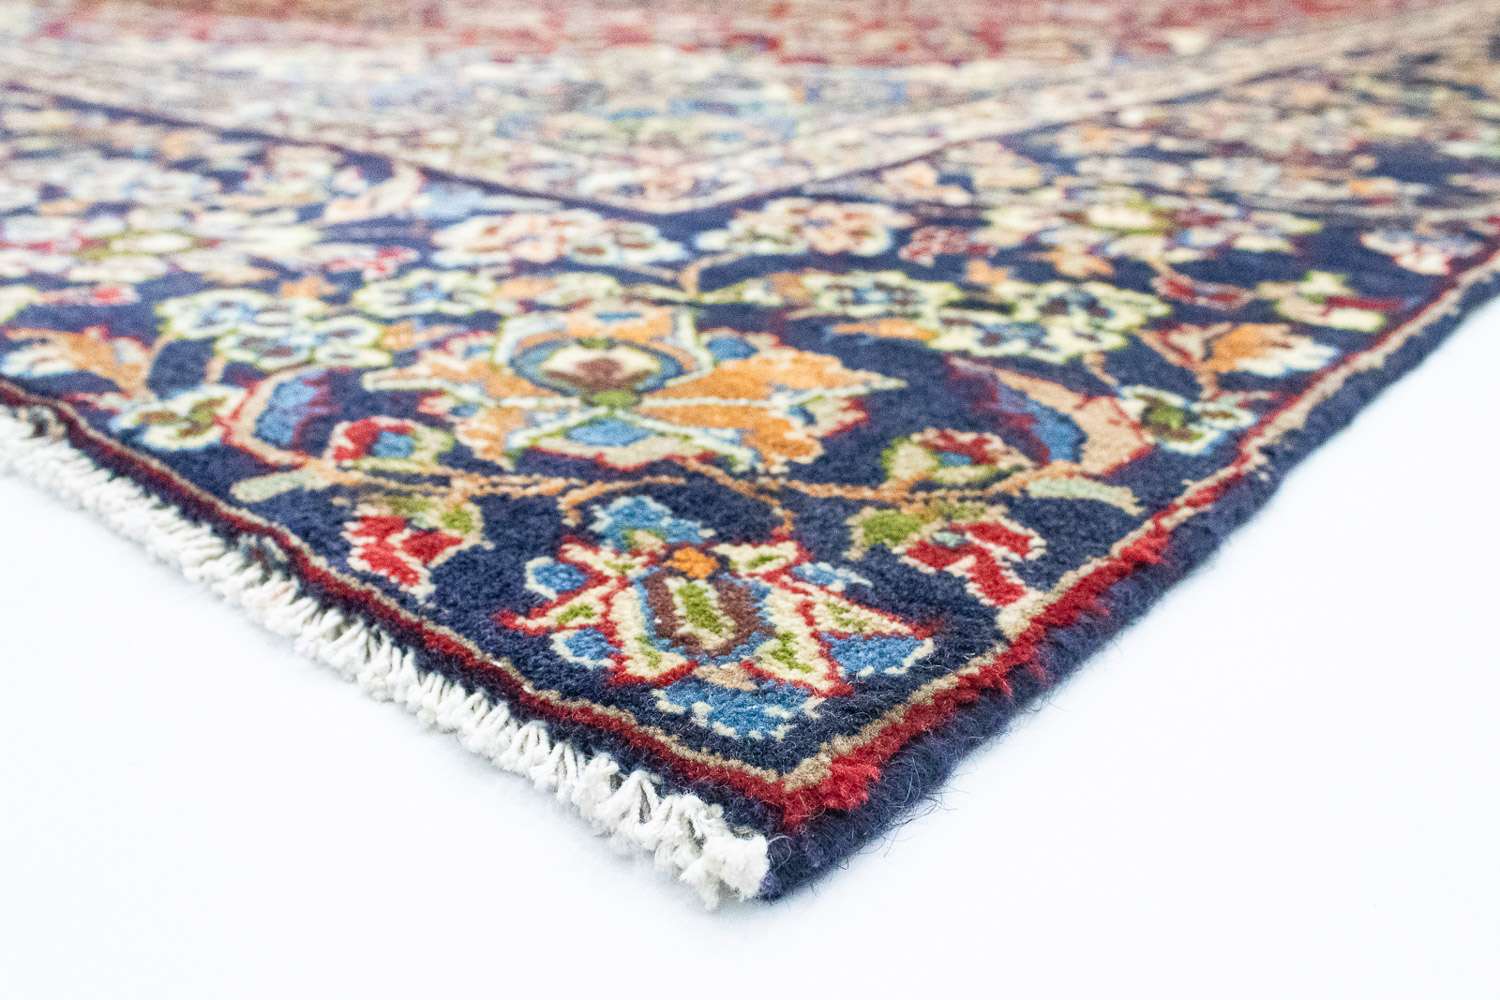 Perser Rug - Classic - 396 x 262 cm - red